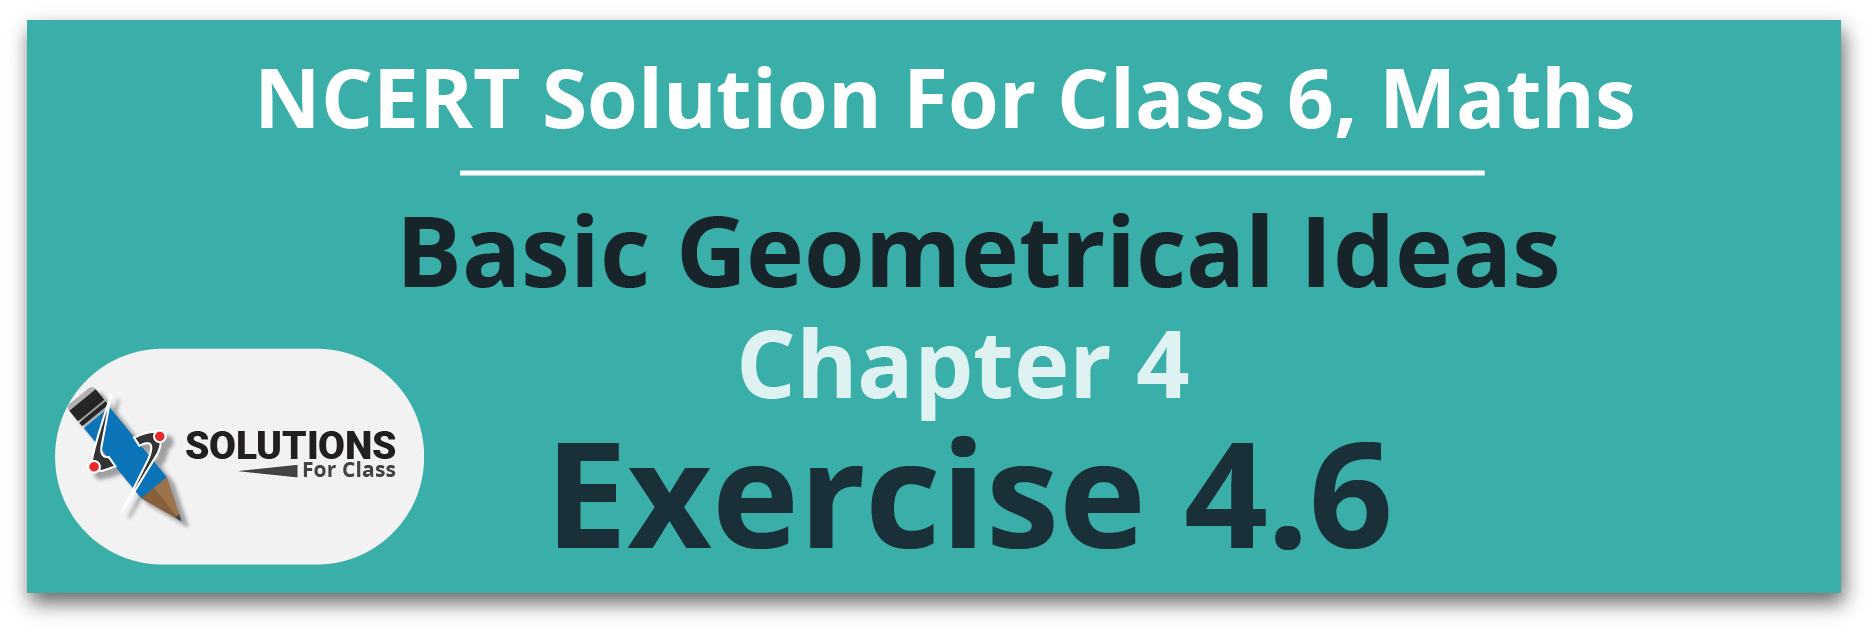 NCERT Solutions For Class 6 Maths, Chapter 4, Basic Geometrical Ideas, Exercise 4.6